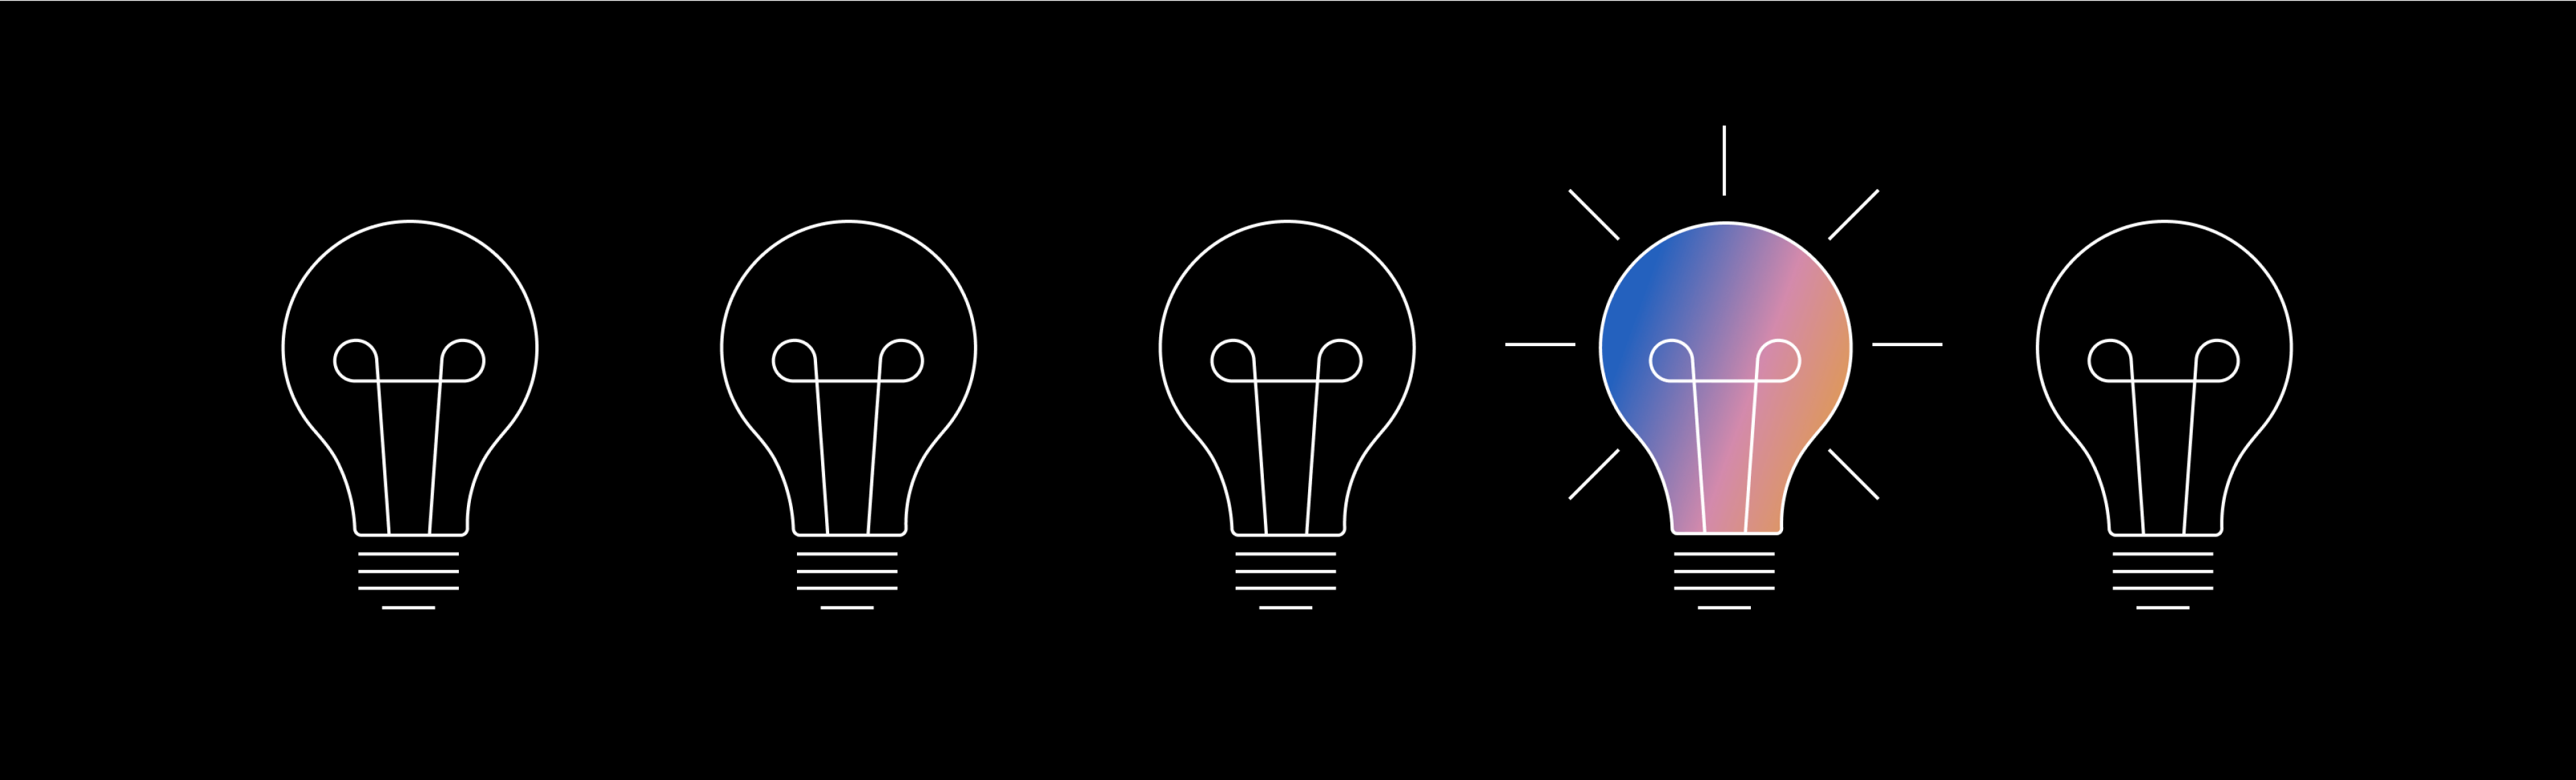 illustrations of 5 lightbulbs with one bright